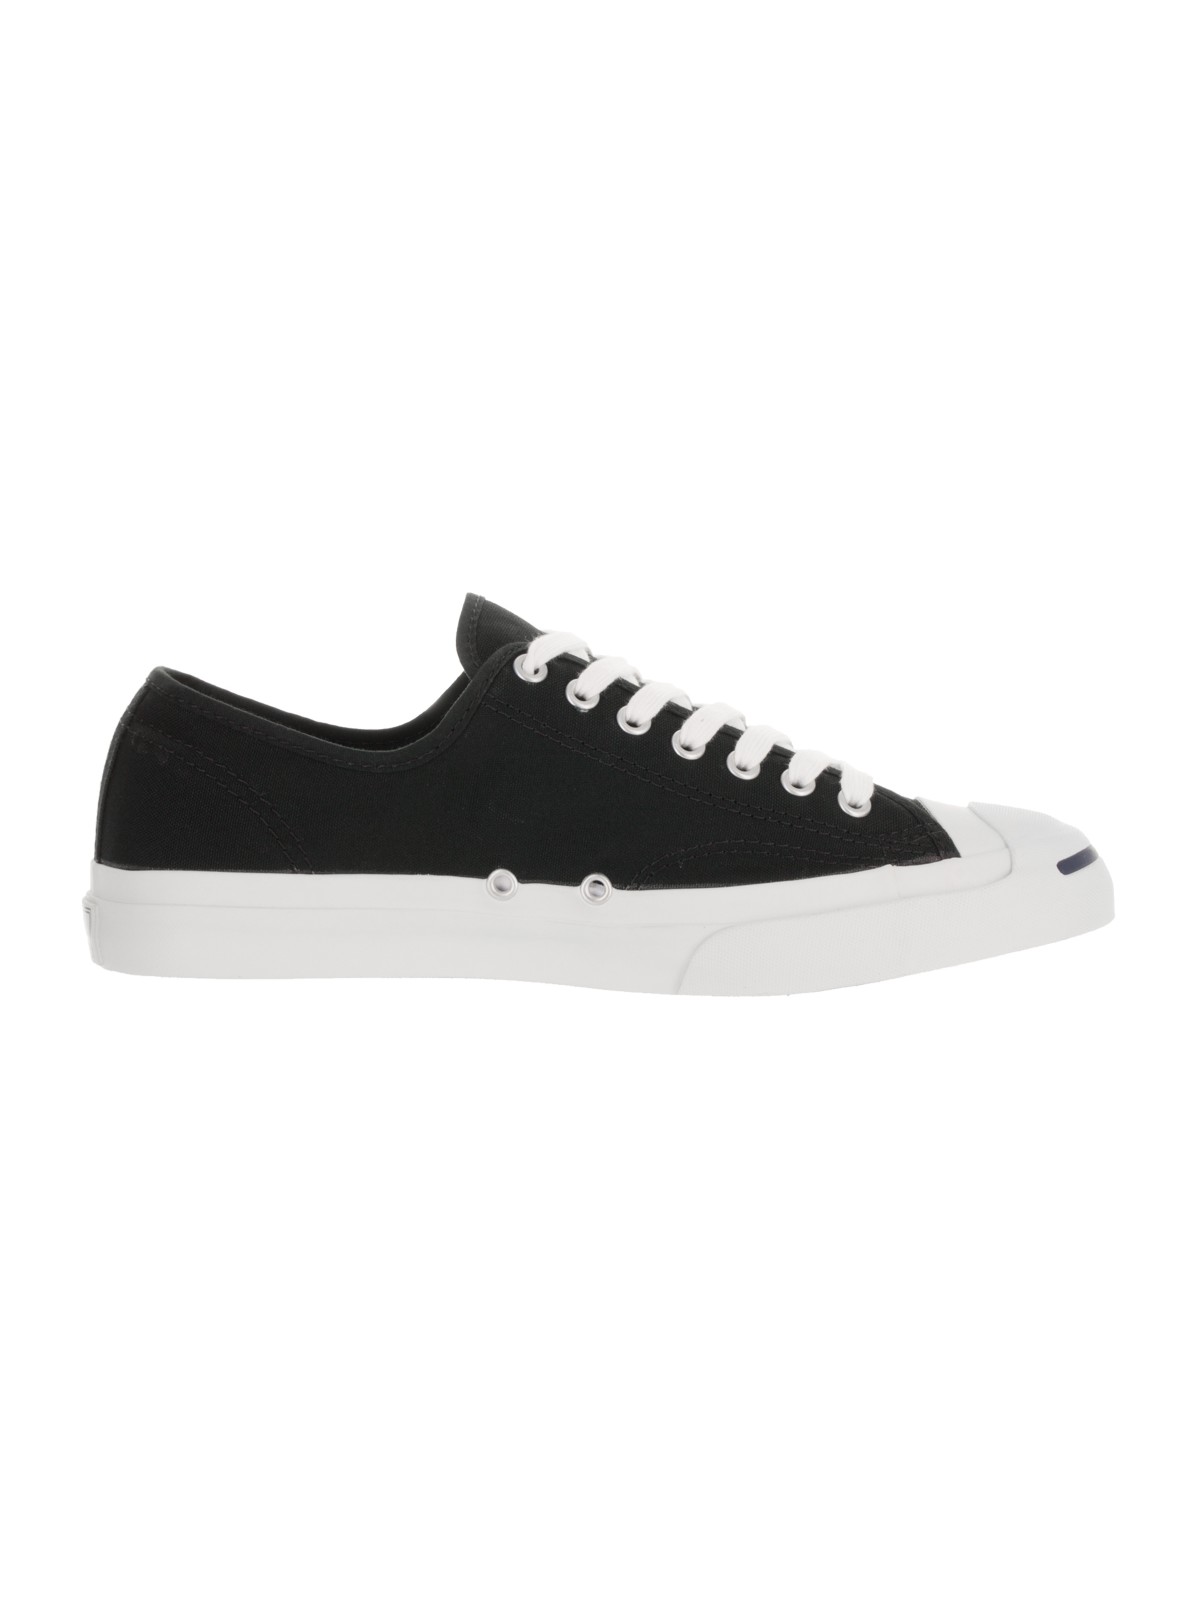 Converse Jack Purcell Jack Ox Canvas Sneaker - image 2 of 5